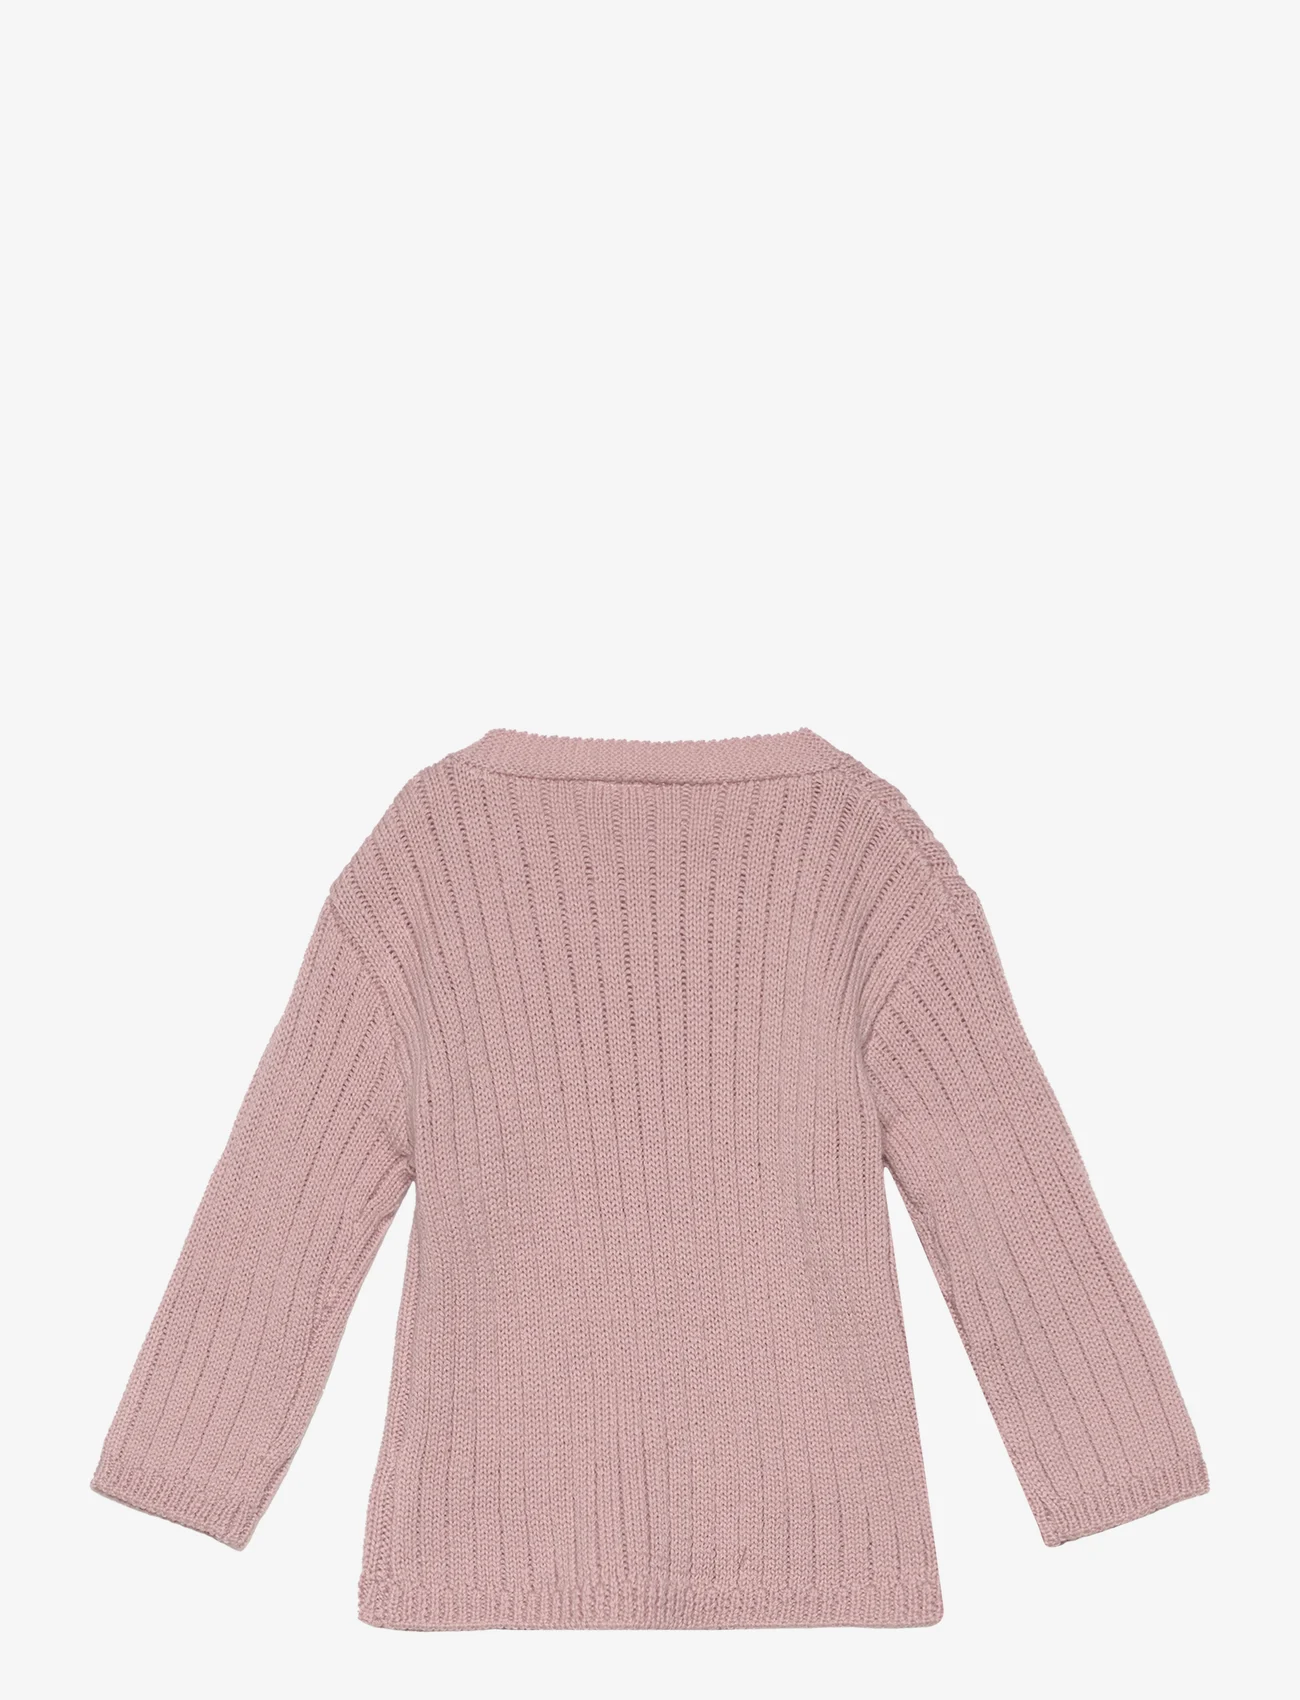 Hust & Claire - Pil - Pullover - trøjer - shade rose - 1